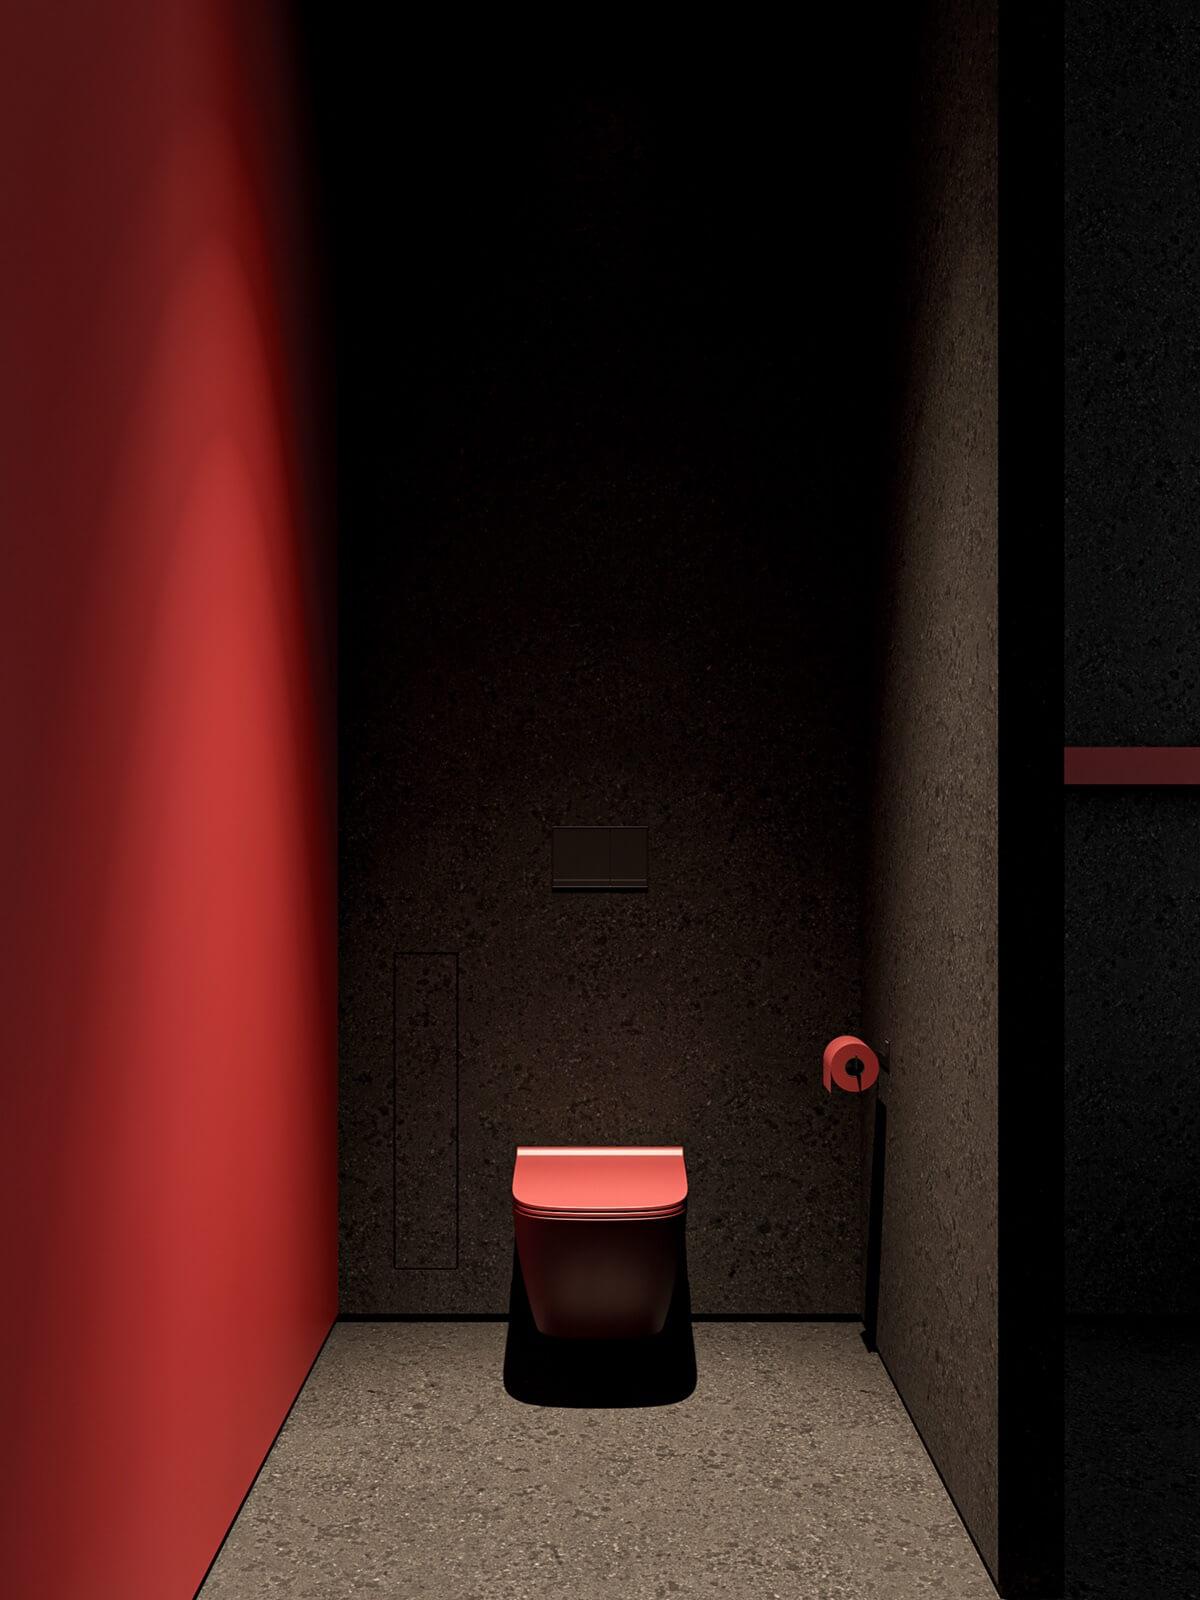 Red toilet